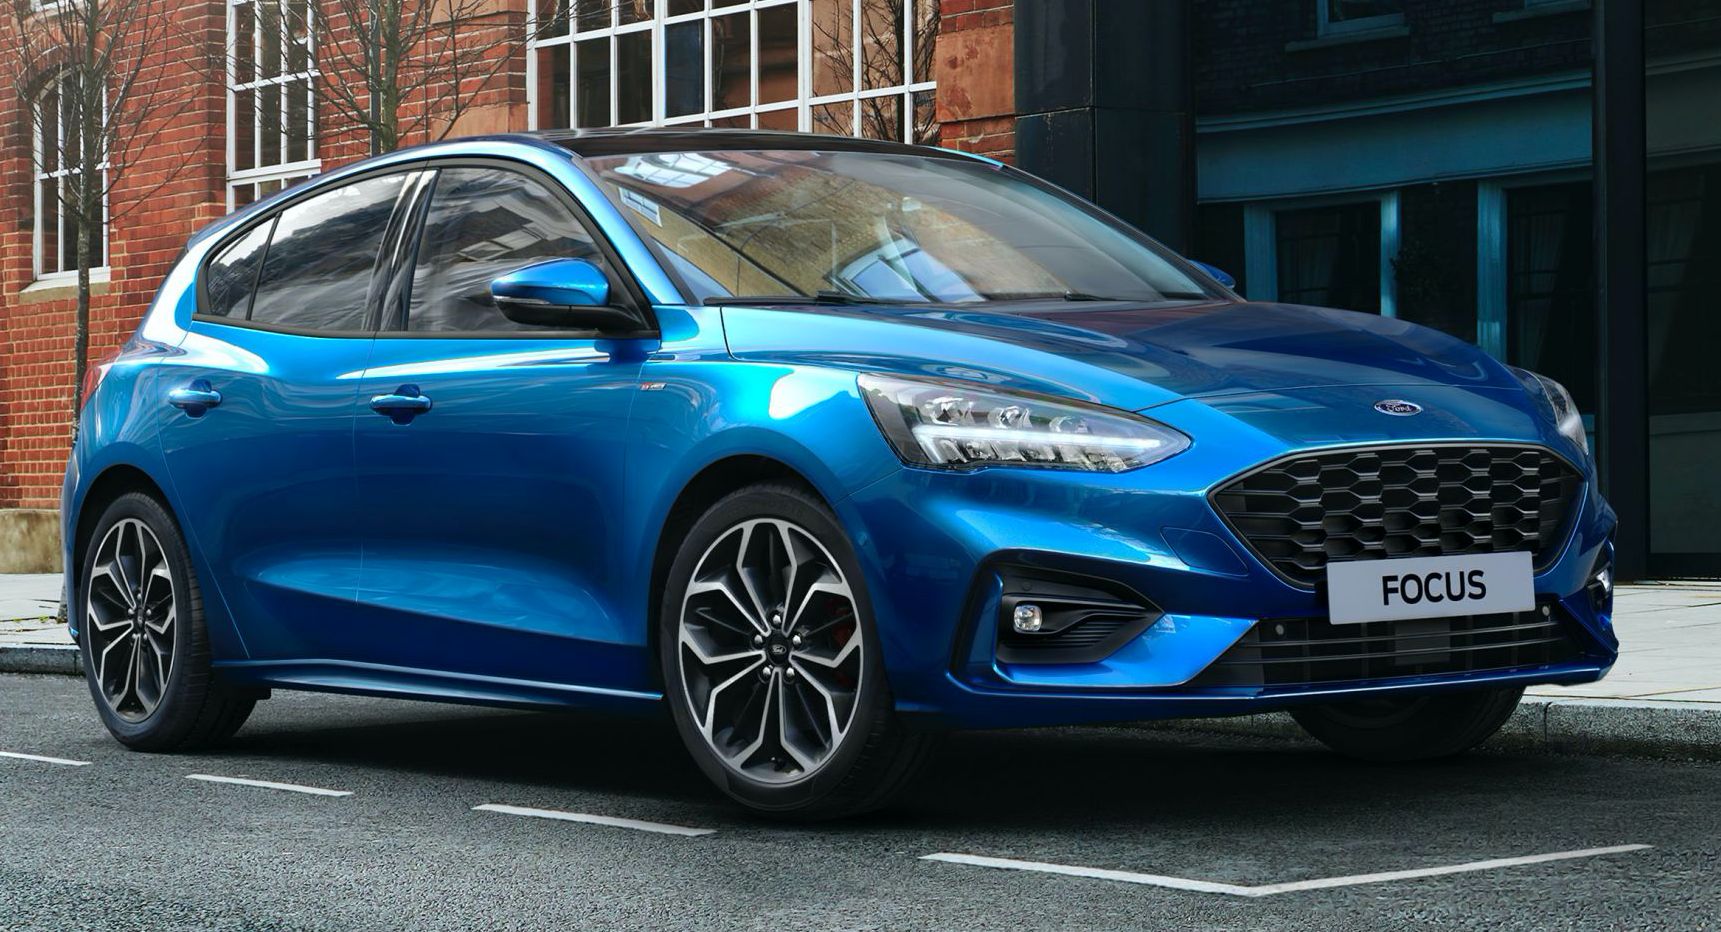 Ford S-Max gains hybrid tech for 2021